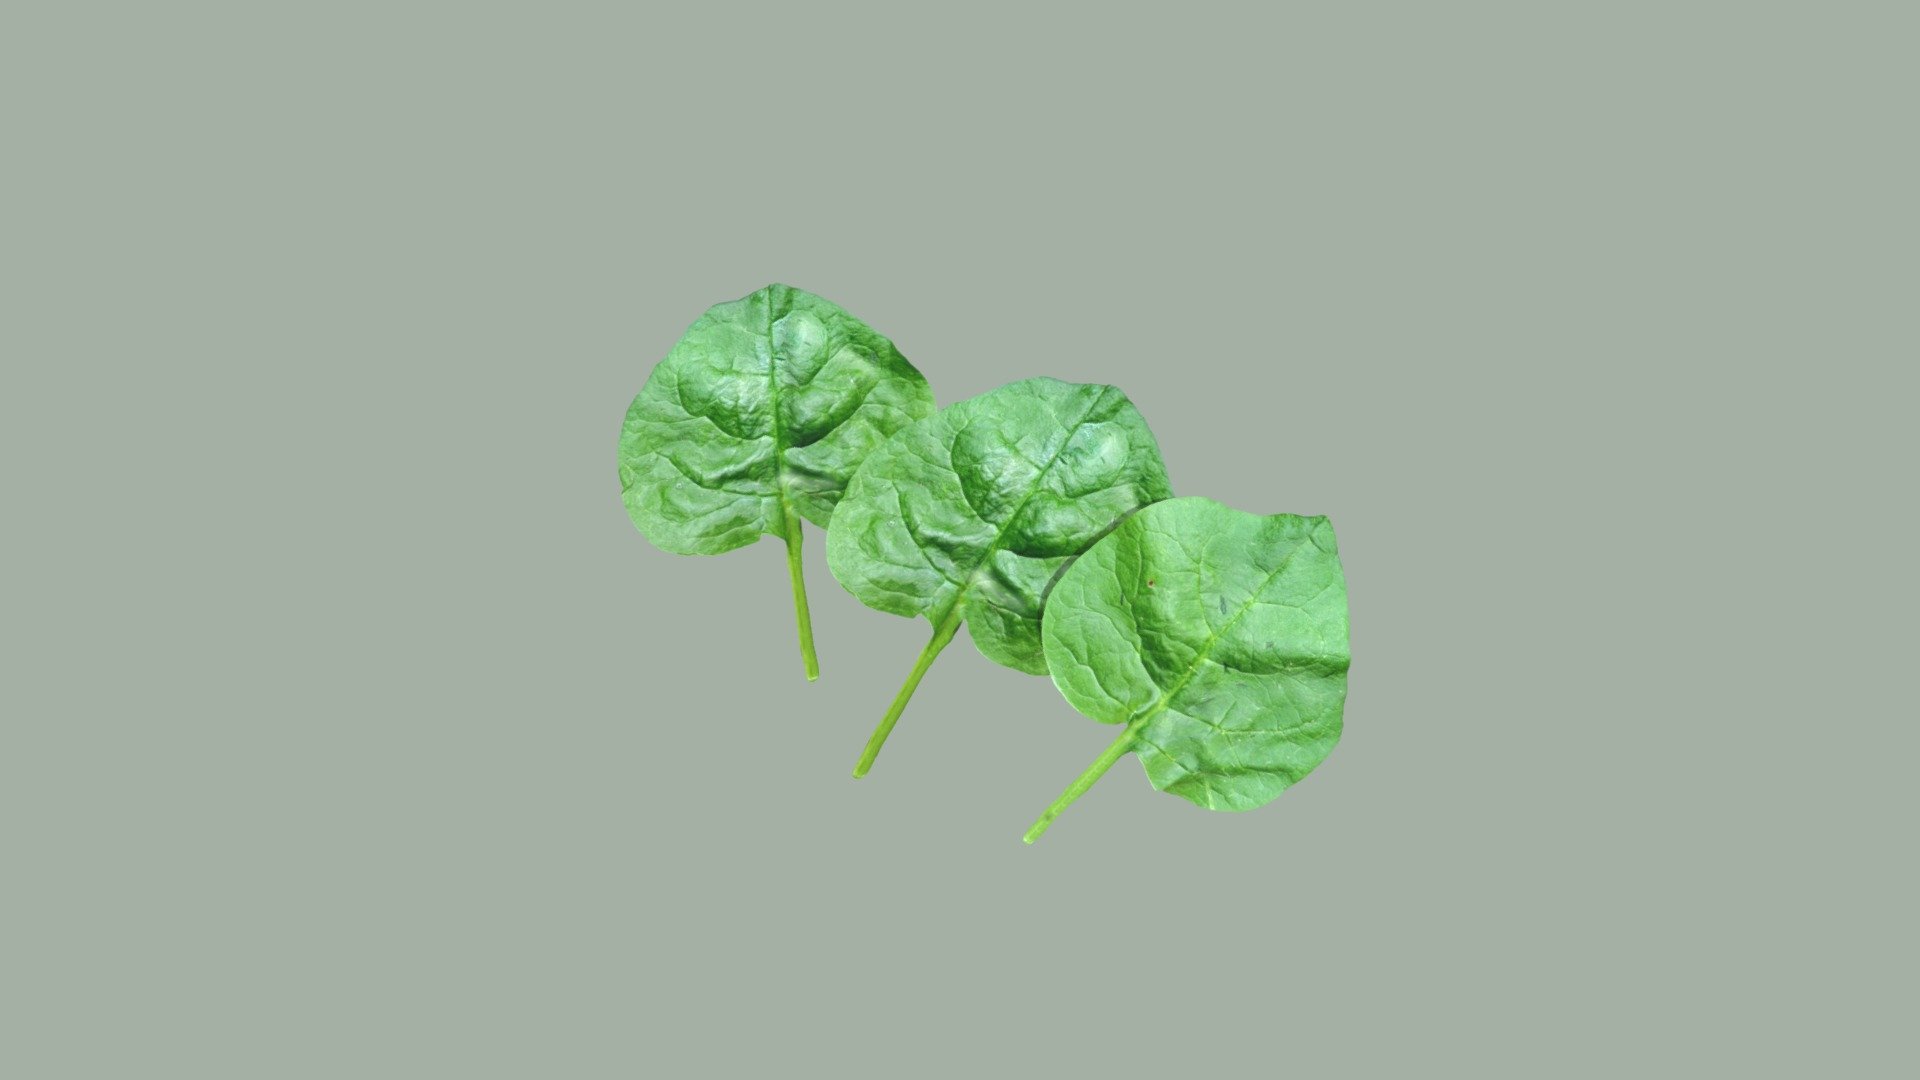 3d model of a Spinach. Perfect for games, scenes or renders.

Model is correctly divided into main parts. All main parts are presented as separate parts therefore materials of objects are easy to be modified or removed and standard parts are easy to be replaced.

TEXTURES: Models includes high textures with maps: Base Color (.png) Height (.png) Metallic (.png) Normal (.png) Roughness (.png)

FORMATS: .obj .dae .stl .blend .fbx .3ds

GENERAL: Easy editable. Model is fully textured.

Vertices:1.0k Polygons: 0.9k

All formats have been tested and work correctly.

Some files may need textures or materials adjusted or added depending on the program they are imported into 3d model